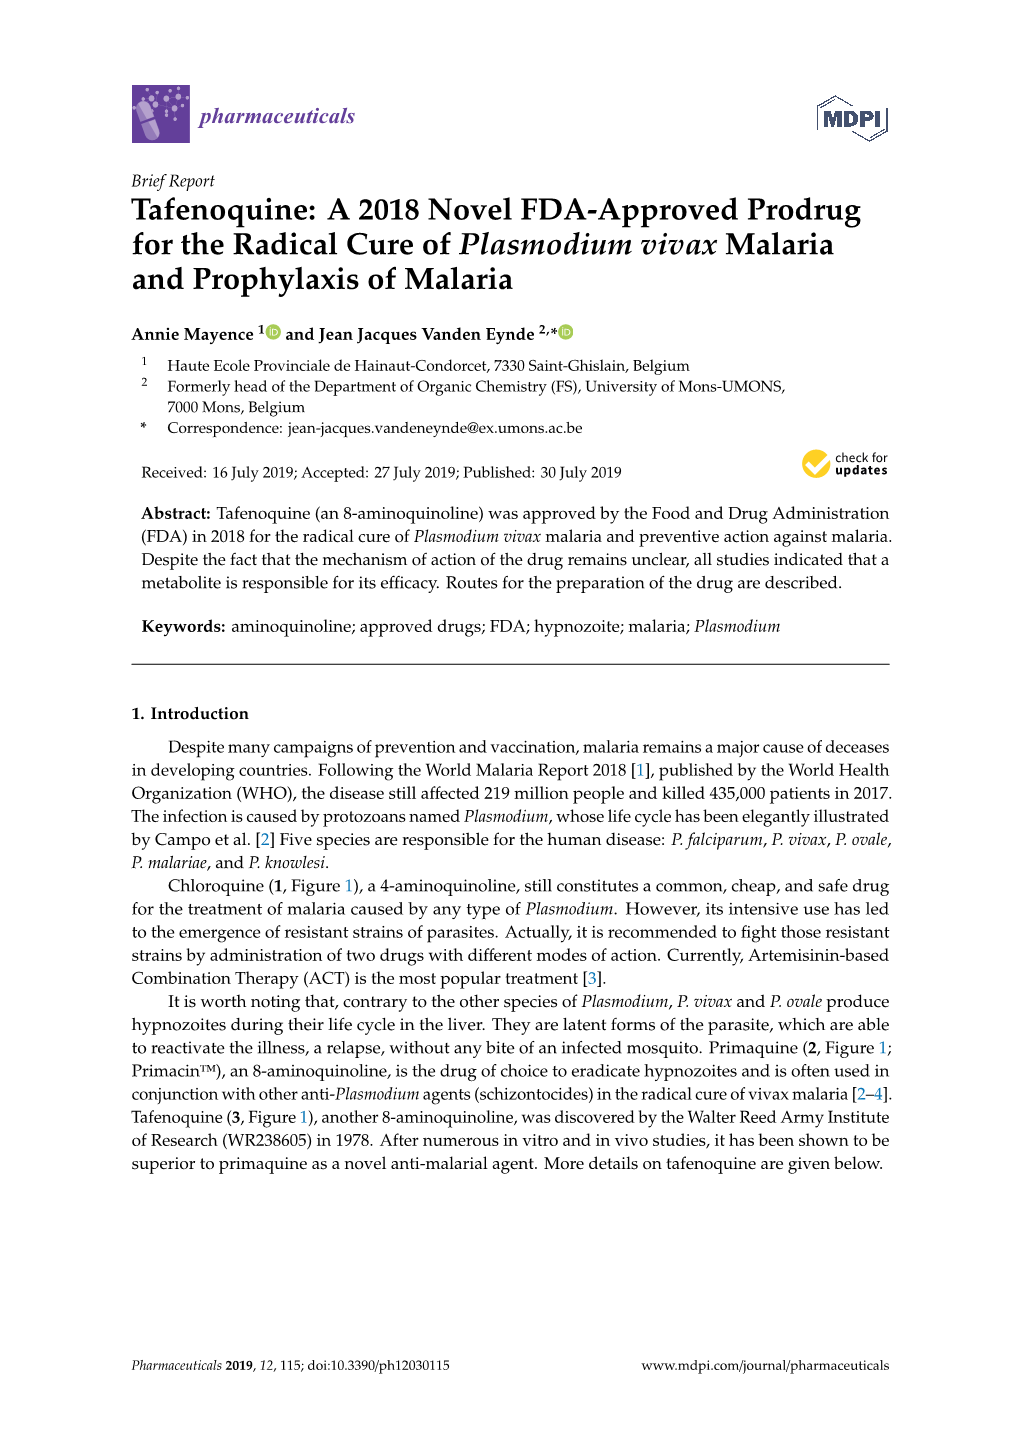 Tafenoquine: a 2018 Novel FDA-Approved Prodrug for the Radical Cure of Plasmodium Vivax Malaria and Prophylaxis of Malaria